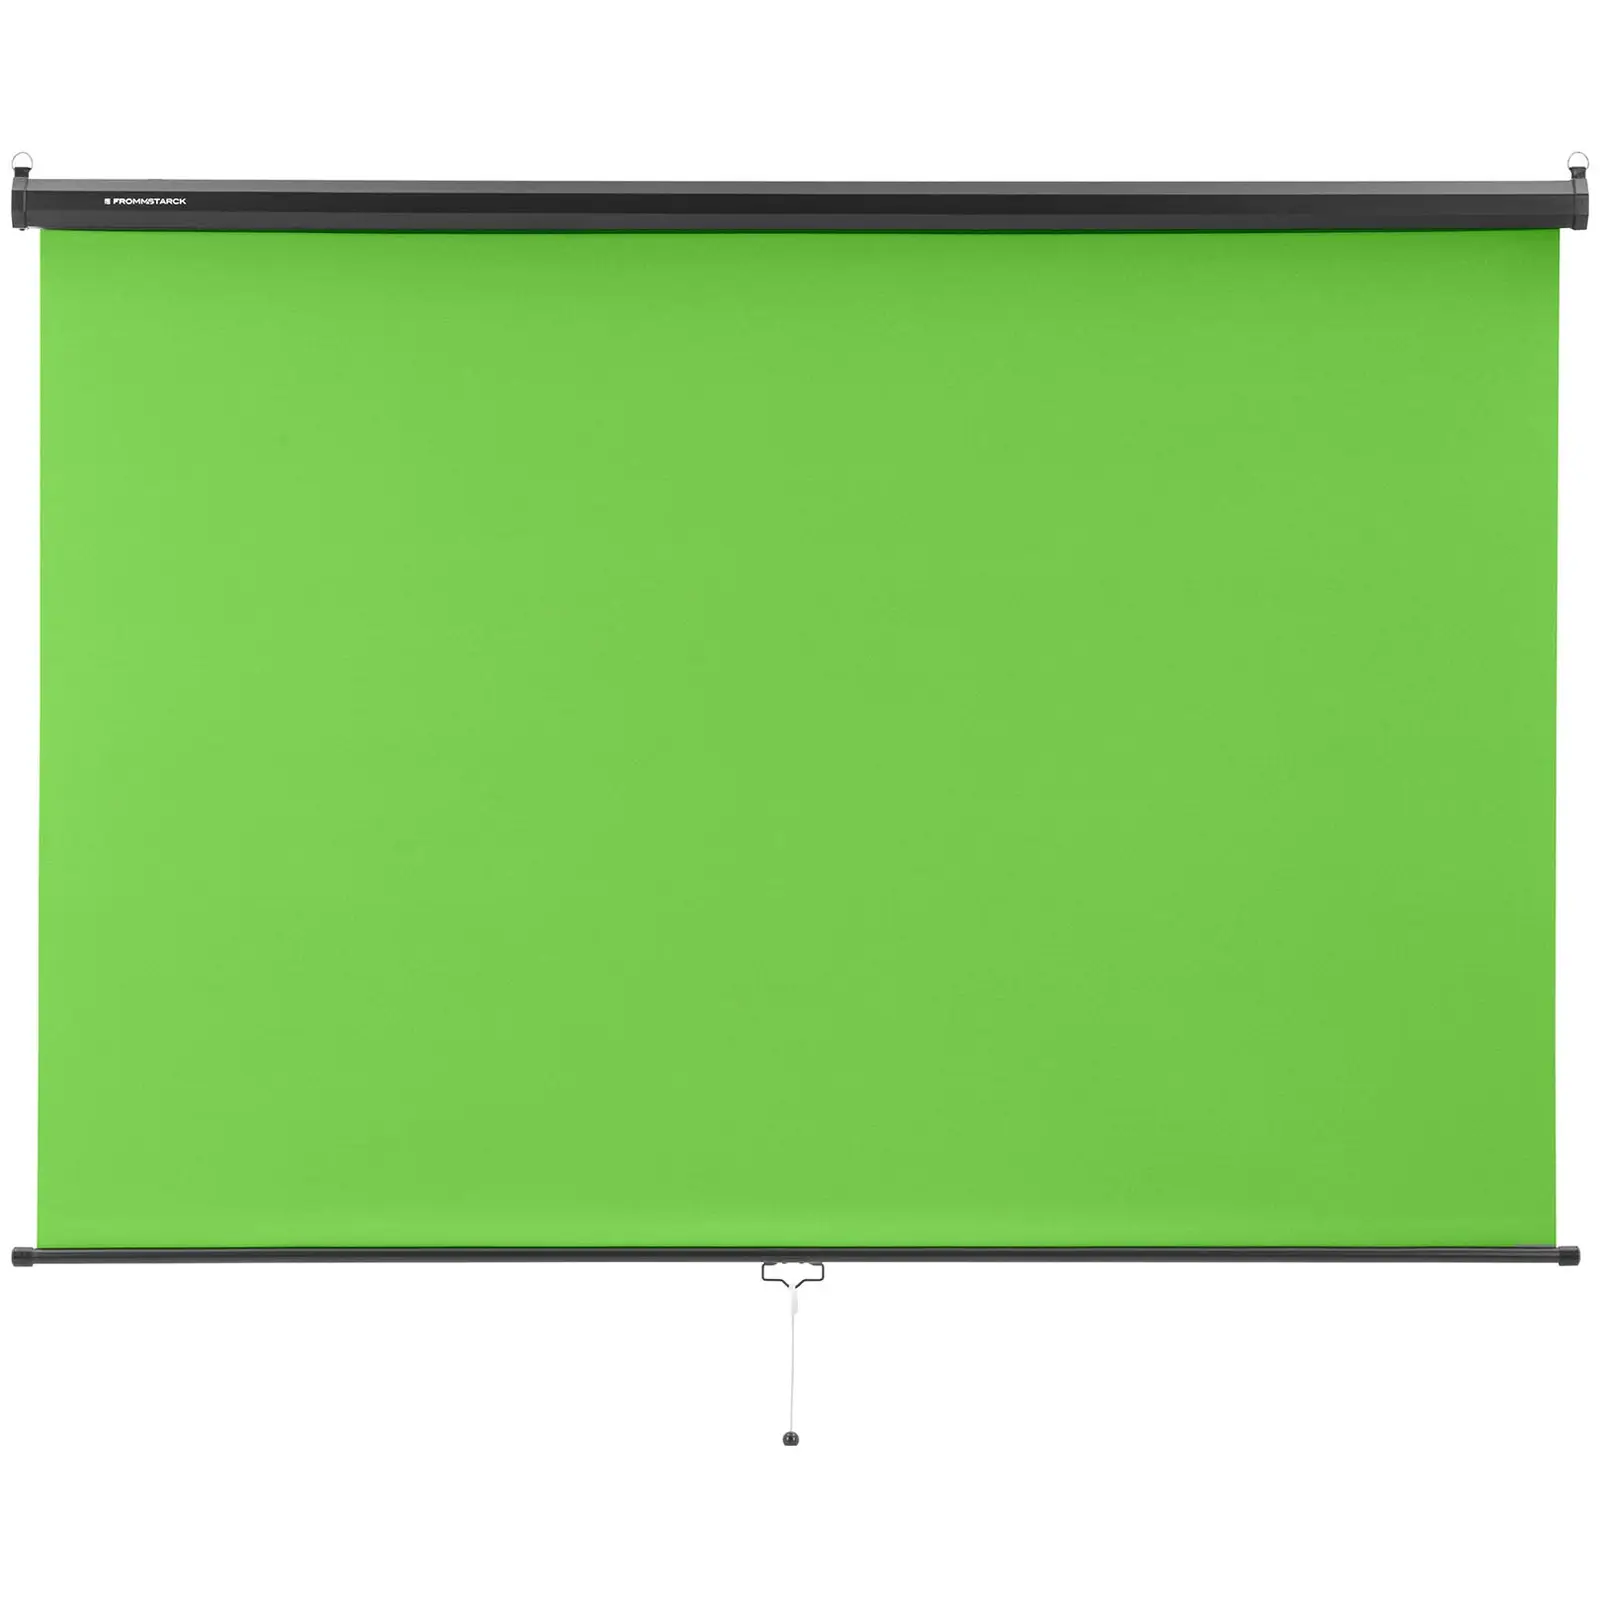 Green Screen - Roller blind - for wall and ceiling - 84" - 2060 x 1813 mm